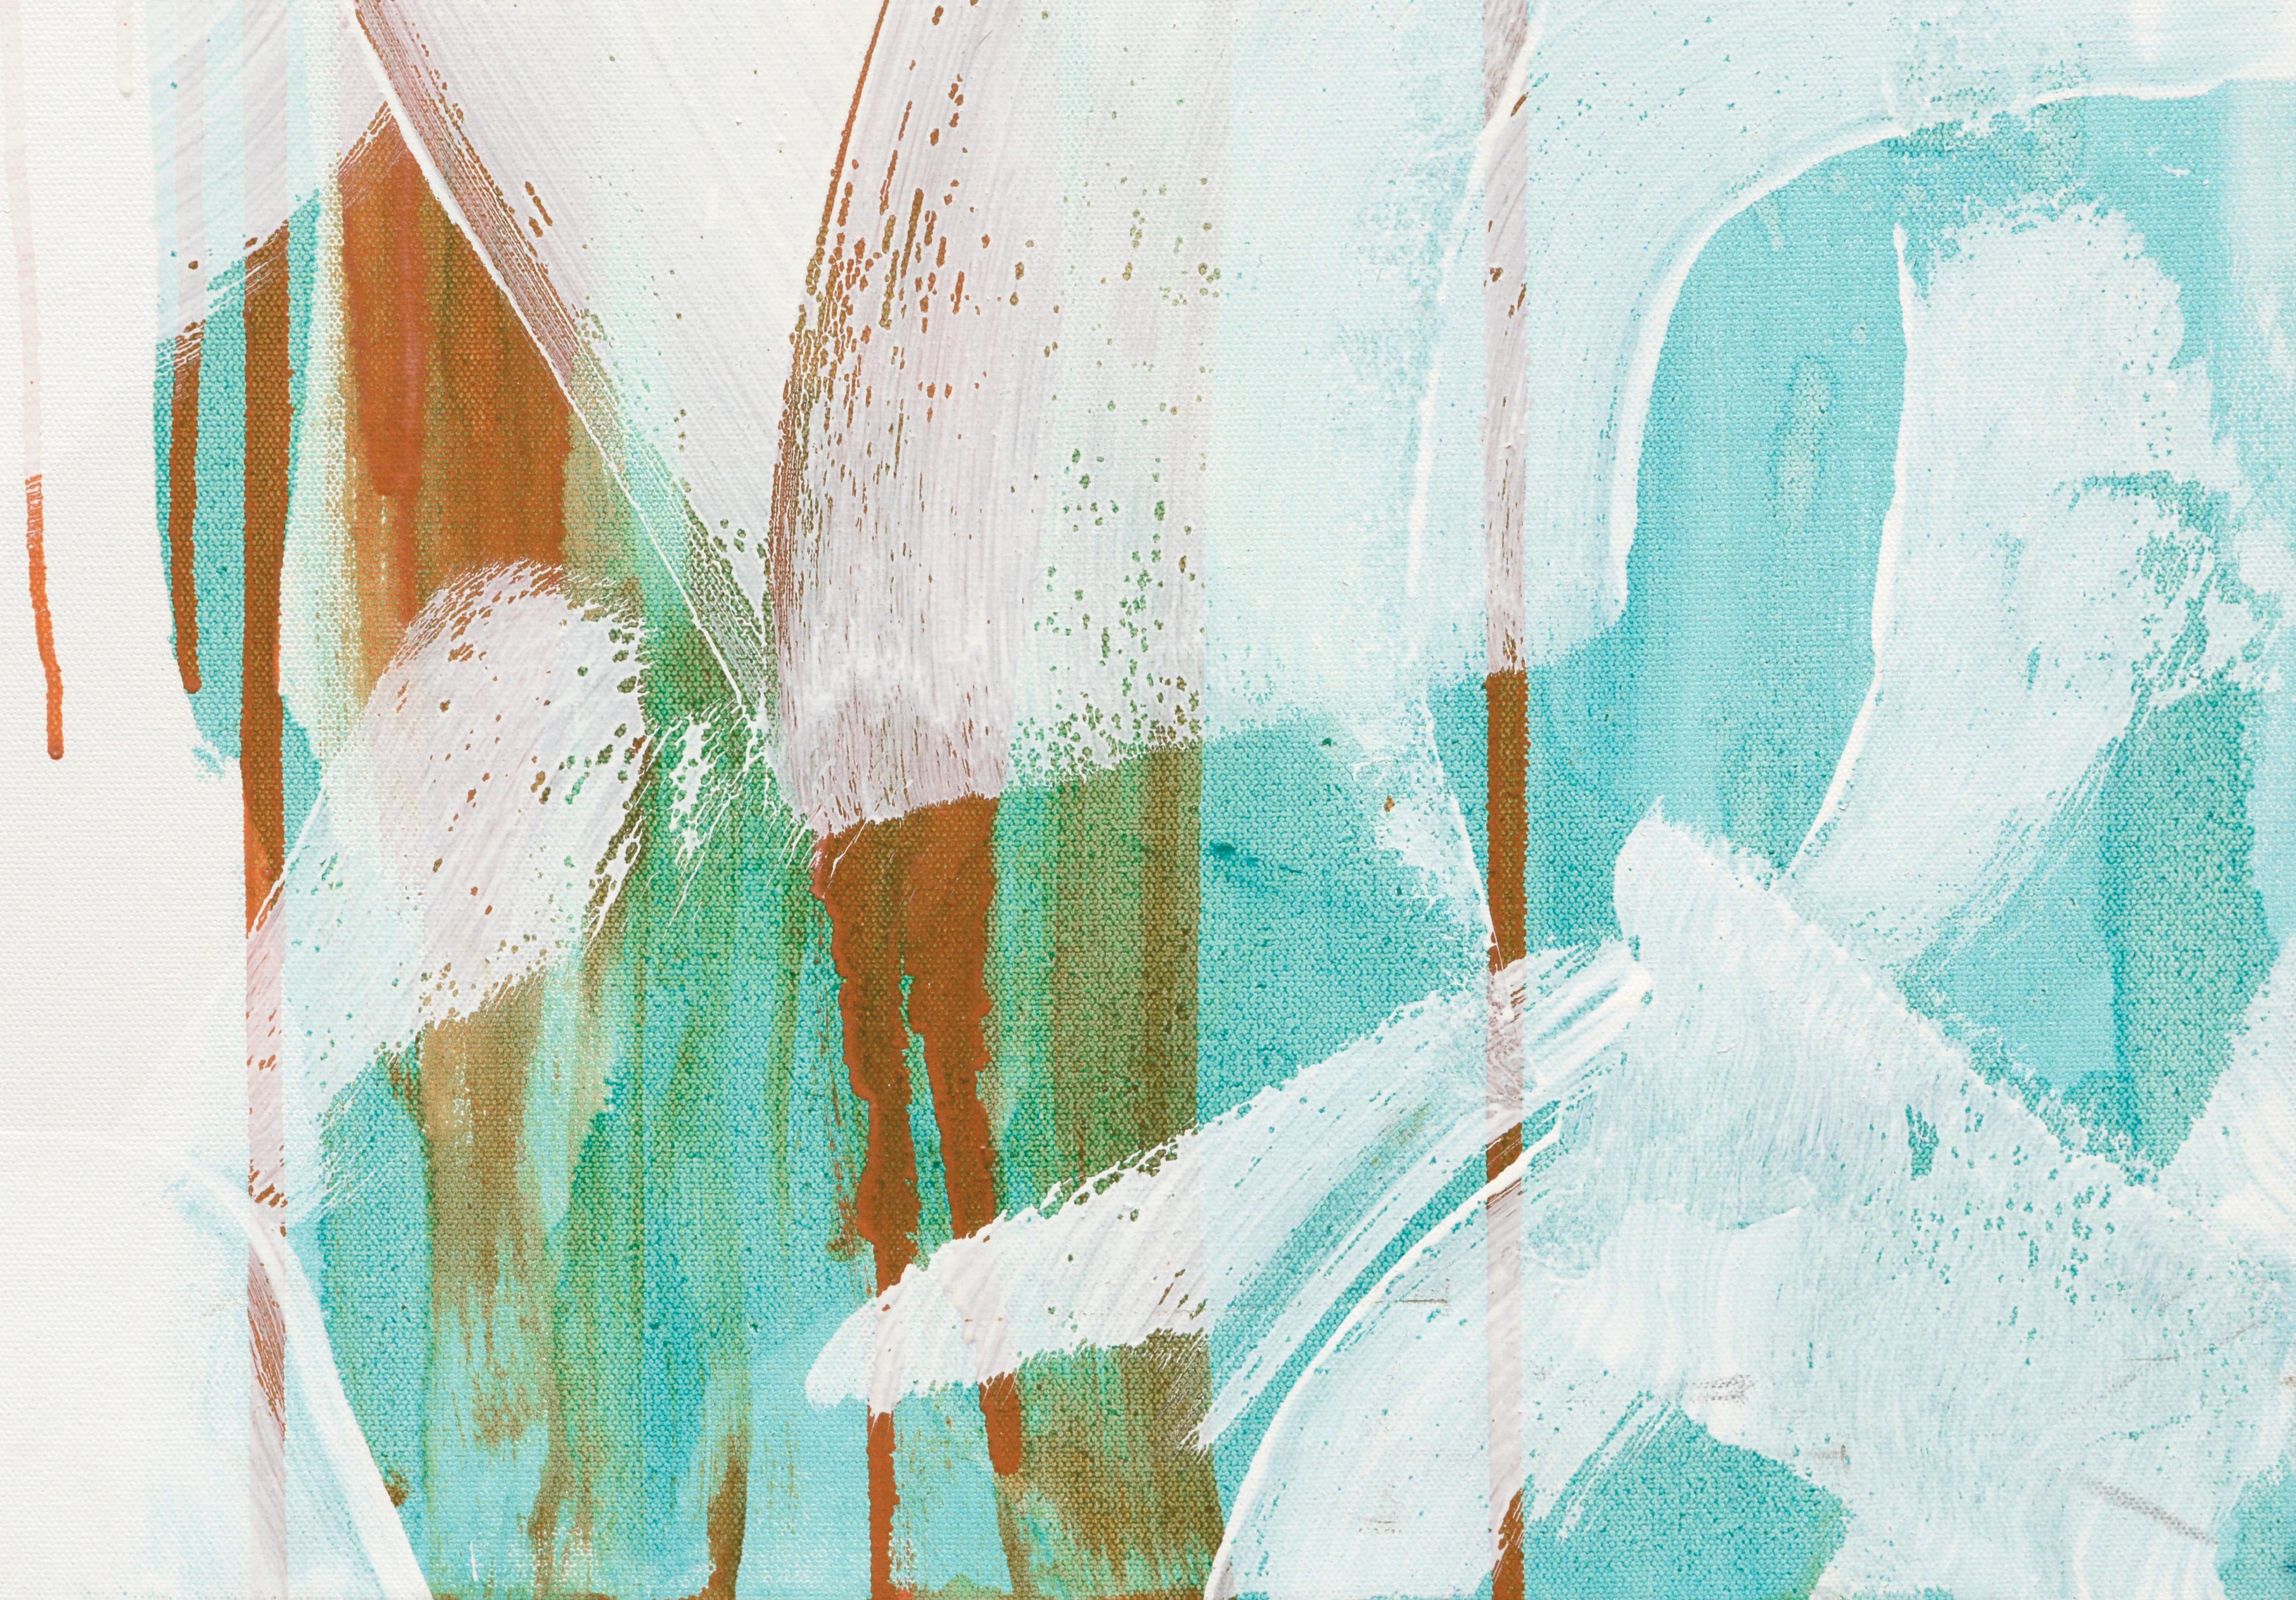 Teal, White, and Orange Abstract - Abstract Expressionist Painting by Unknown